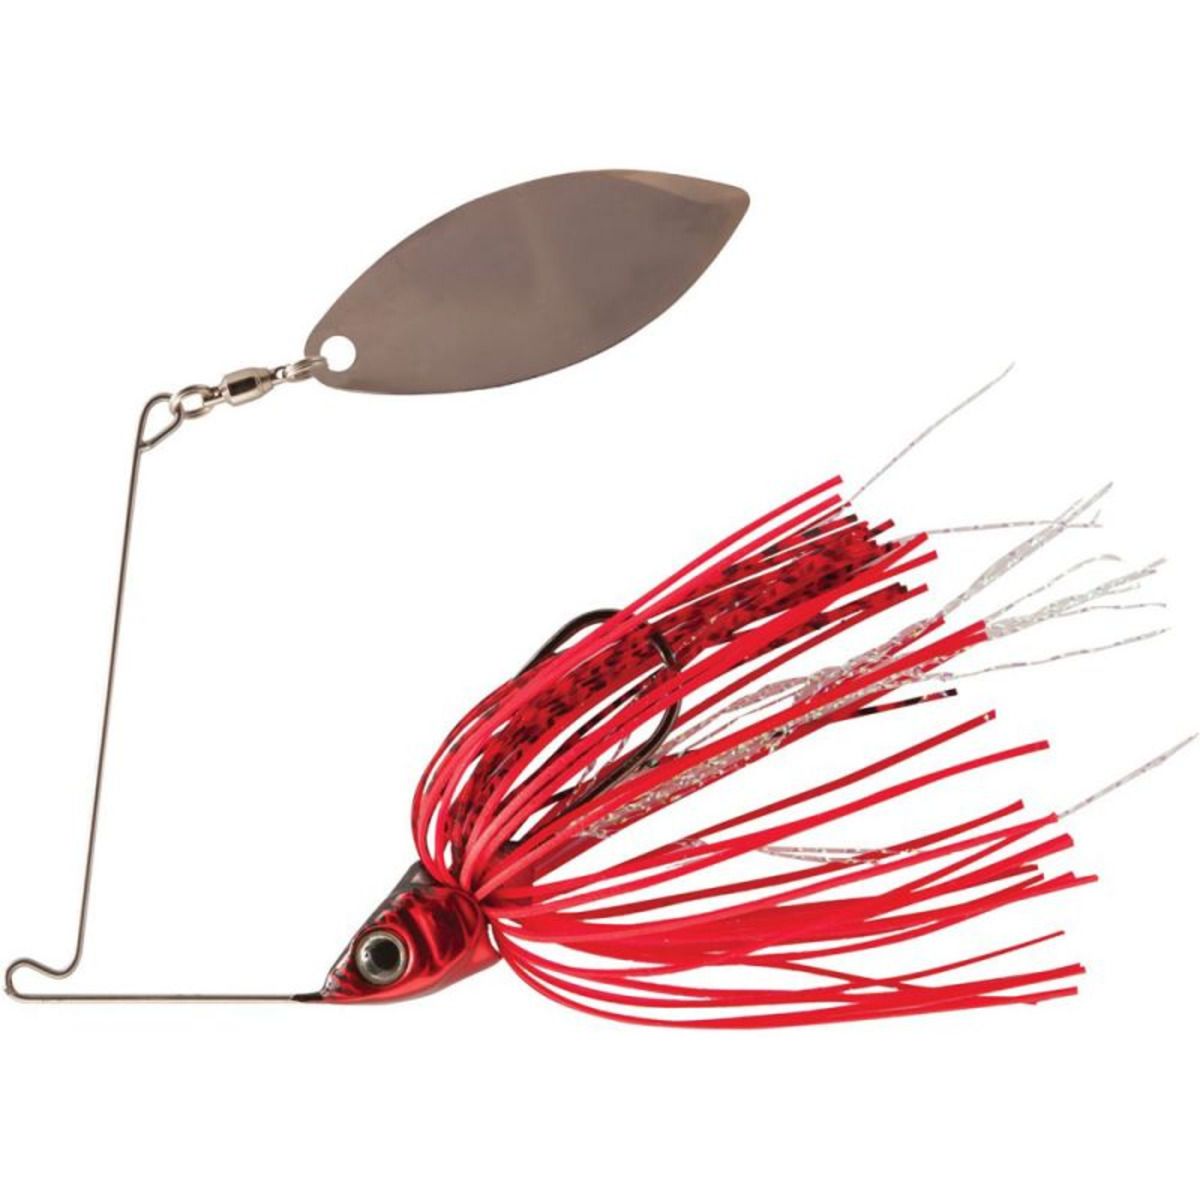 Rapture Sharp Spin Single Willow - 14.0 g - Red Hot